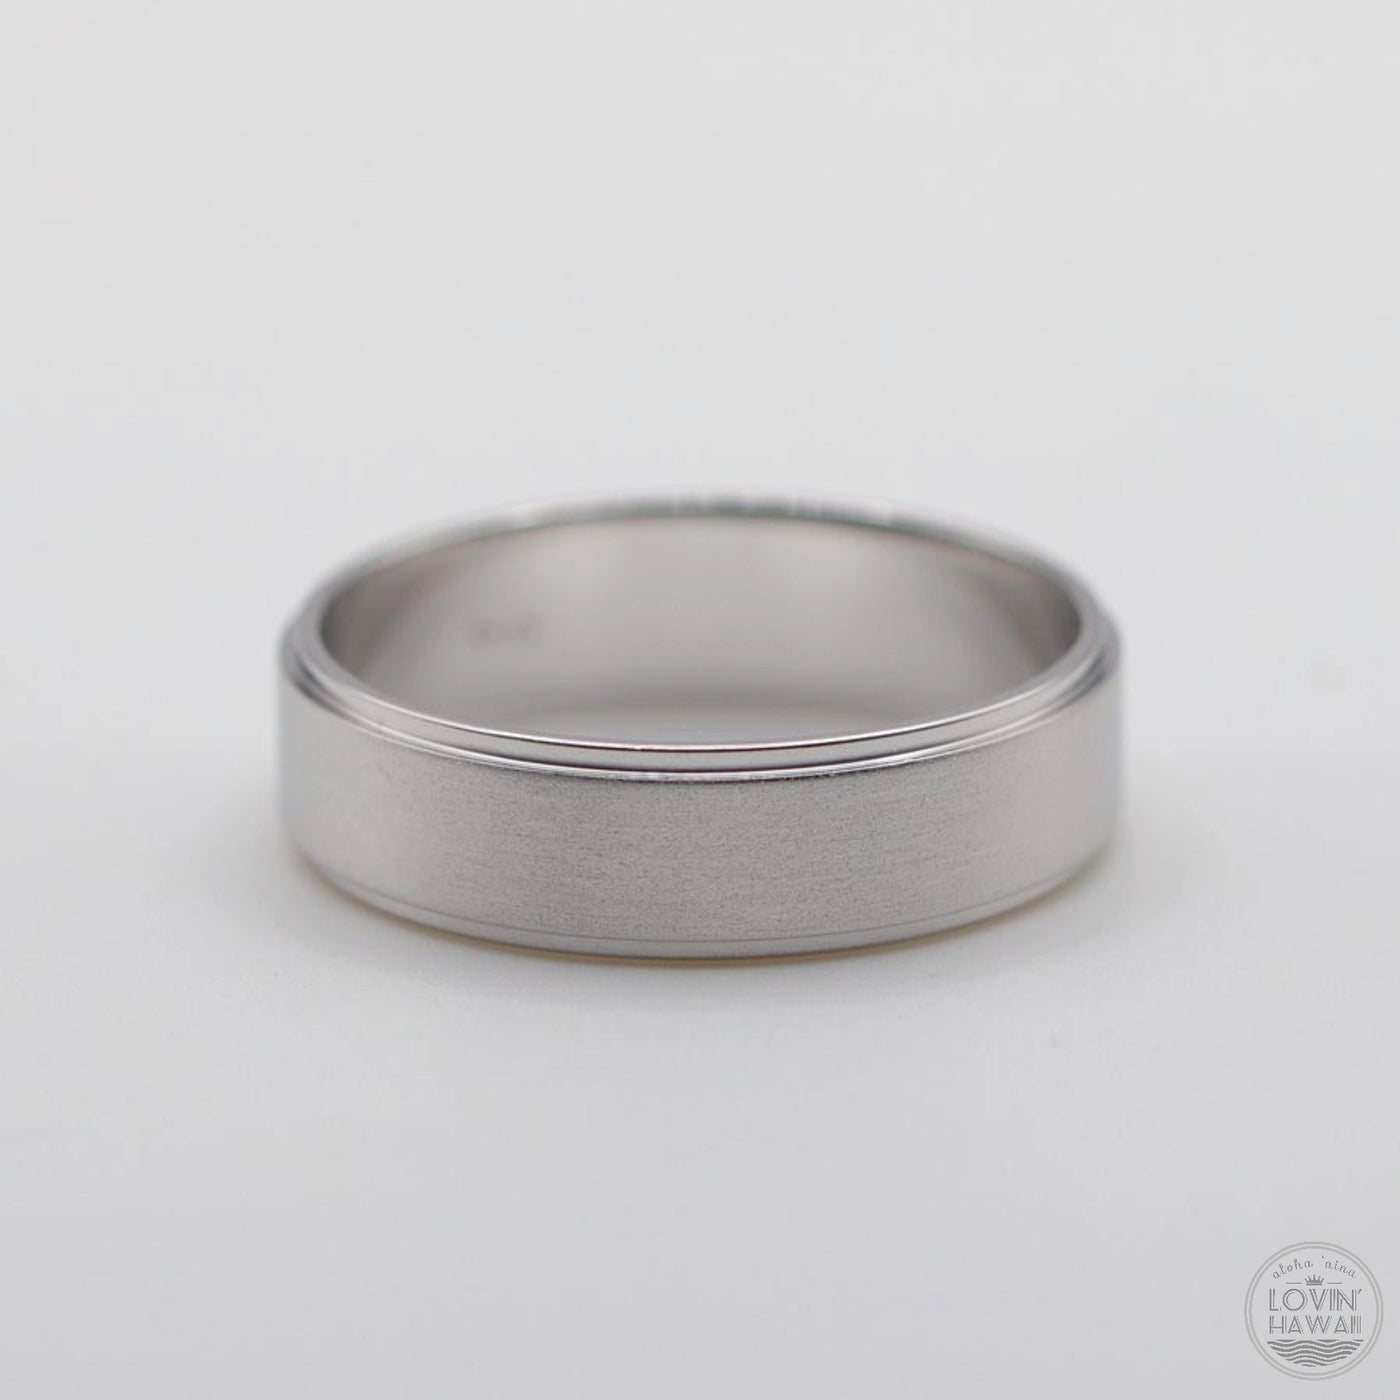 Mens wedding ring bands in white gold